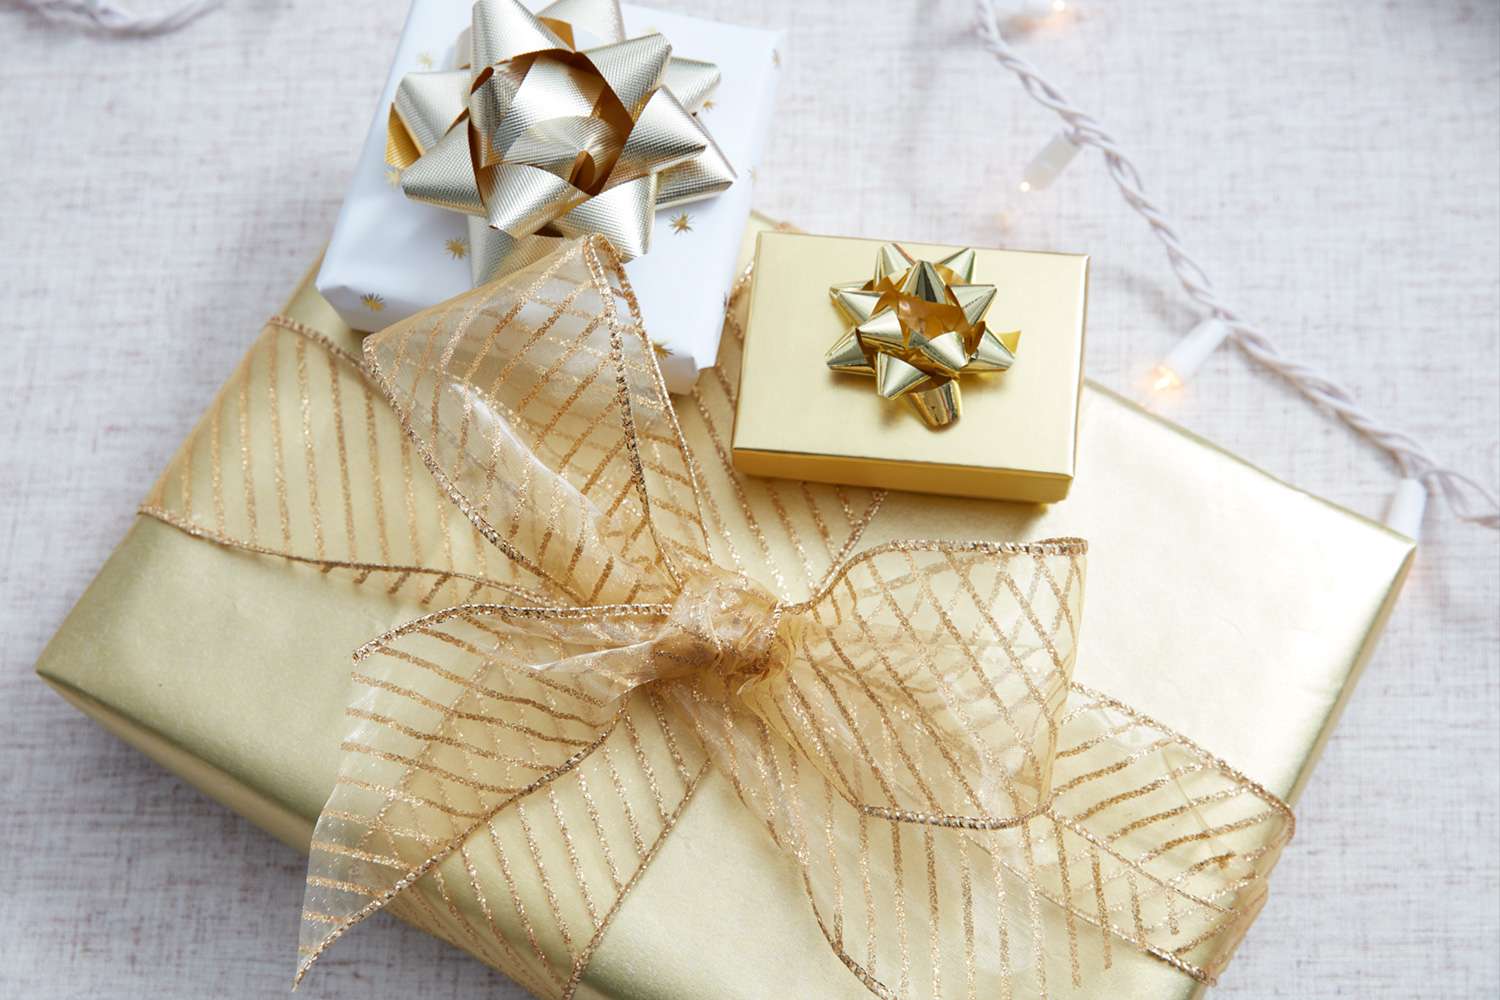 Christmas wrapped gifts